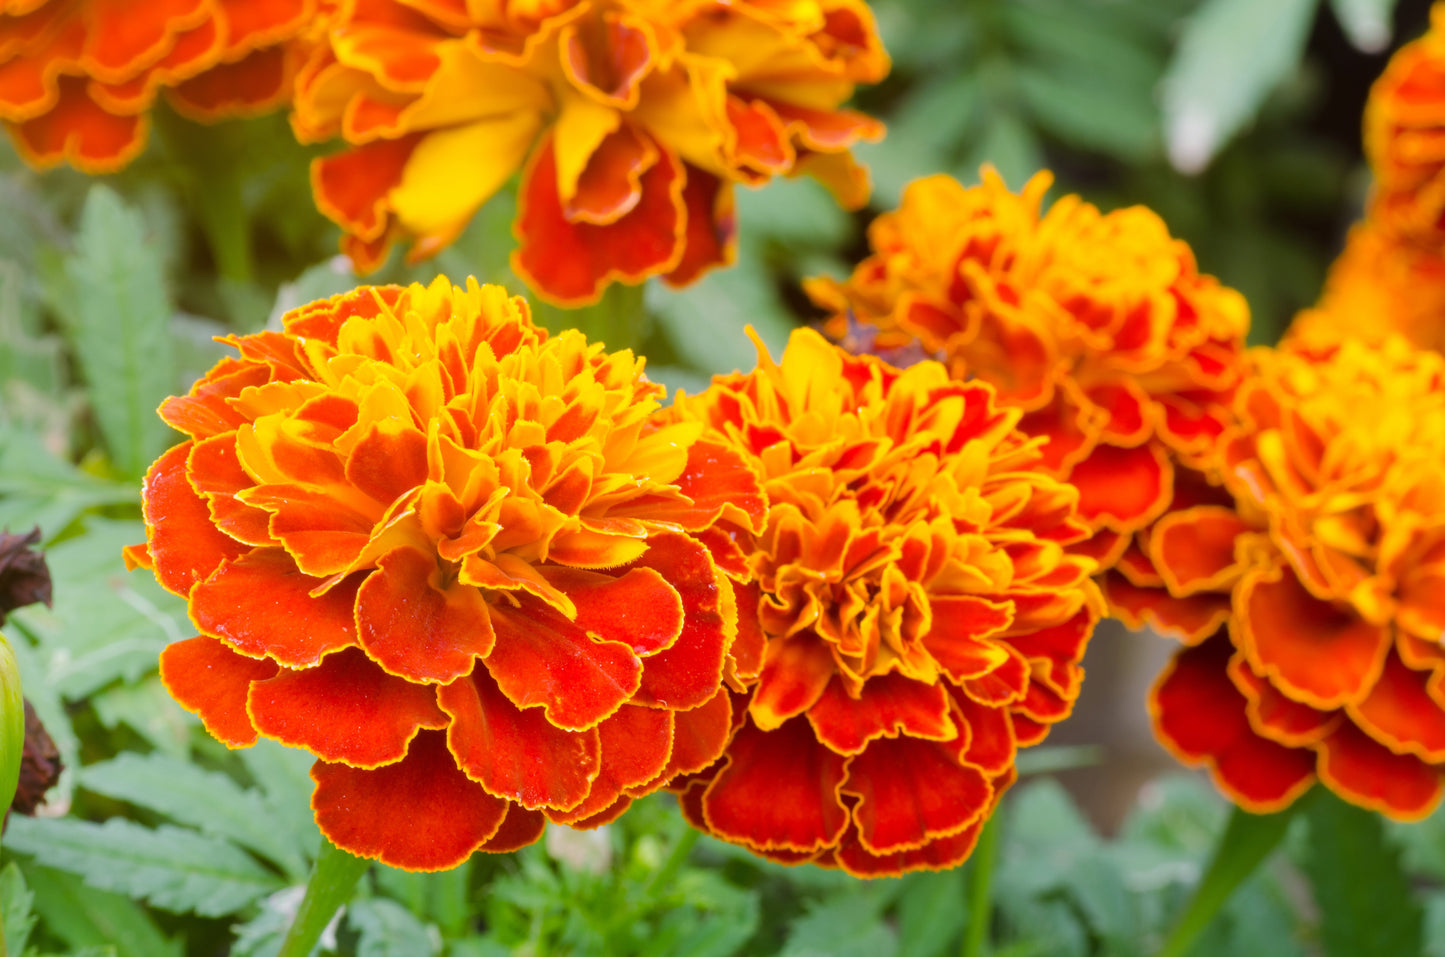 400 FRENCH MARIGOLD SPARKY Mixed Colors Calendula Orange Yellow Red Flower Seeds